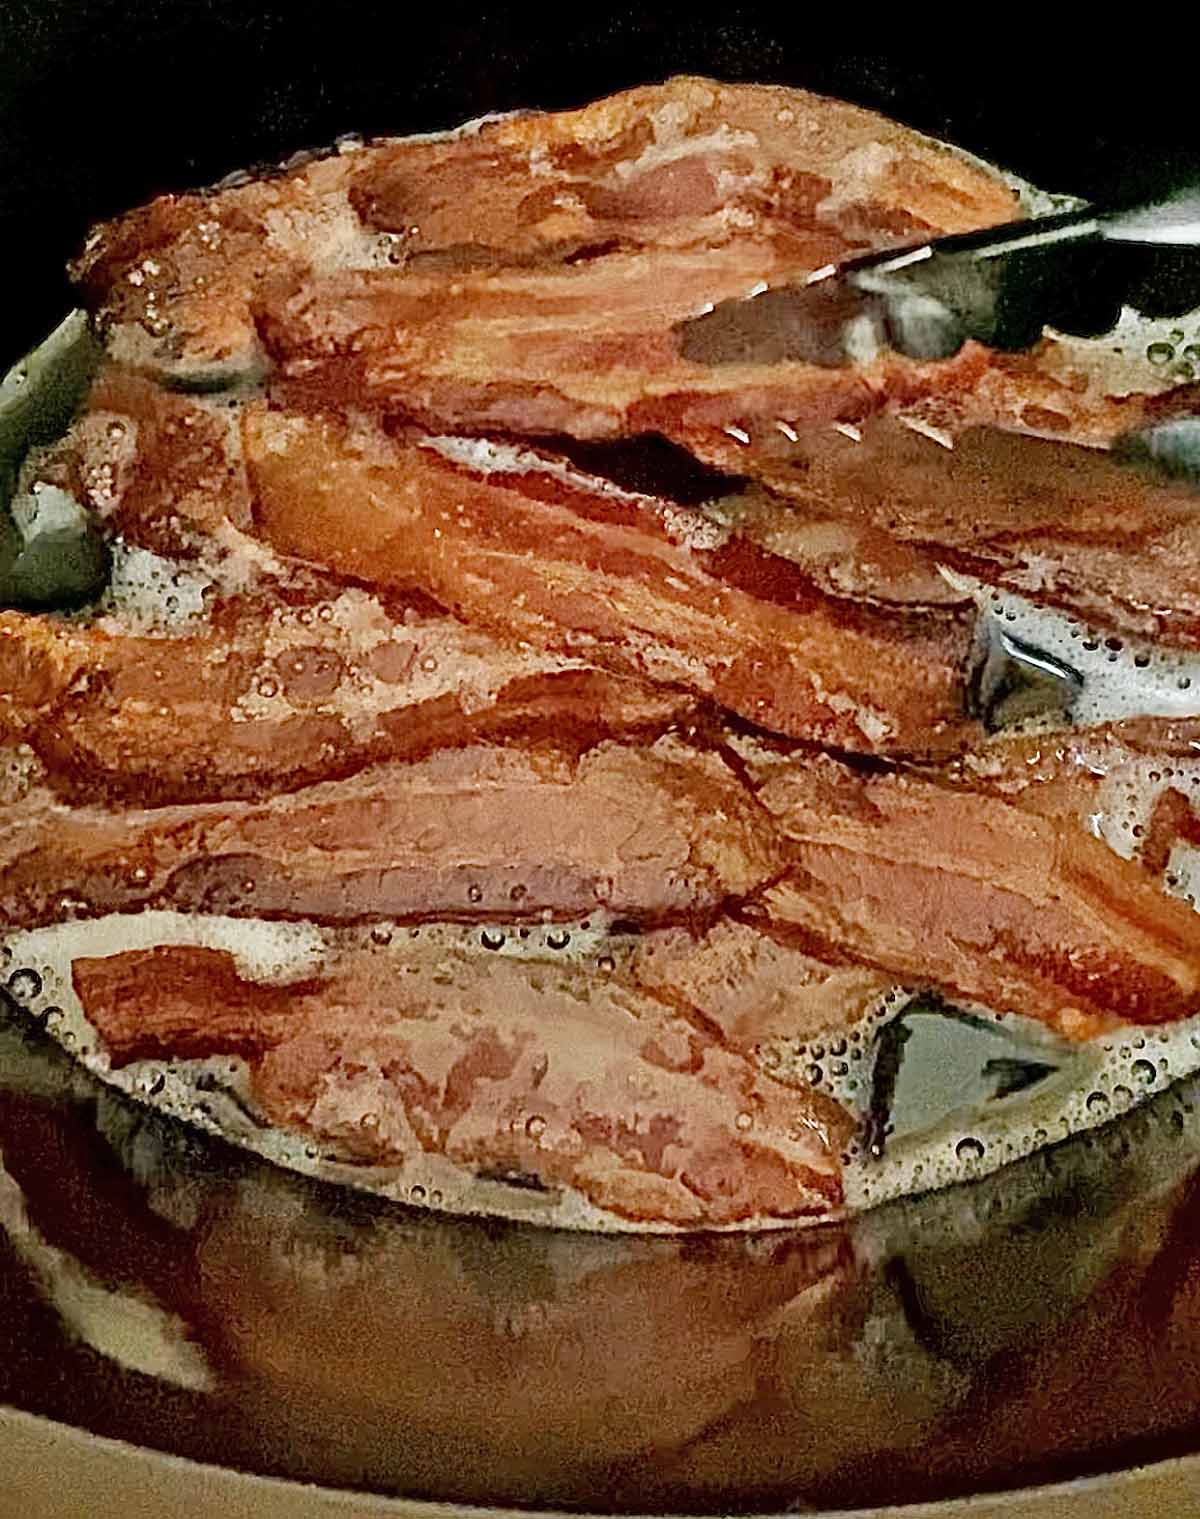 Cooked bacon inside the crock pot, being rearranged with silver tongs.